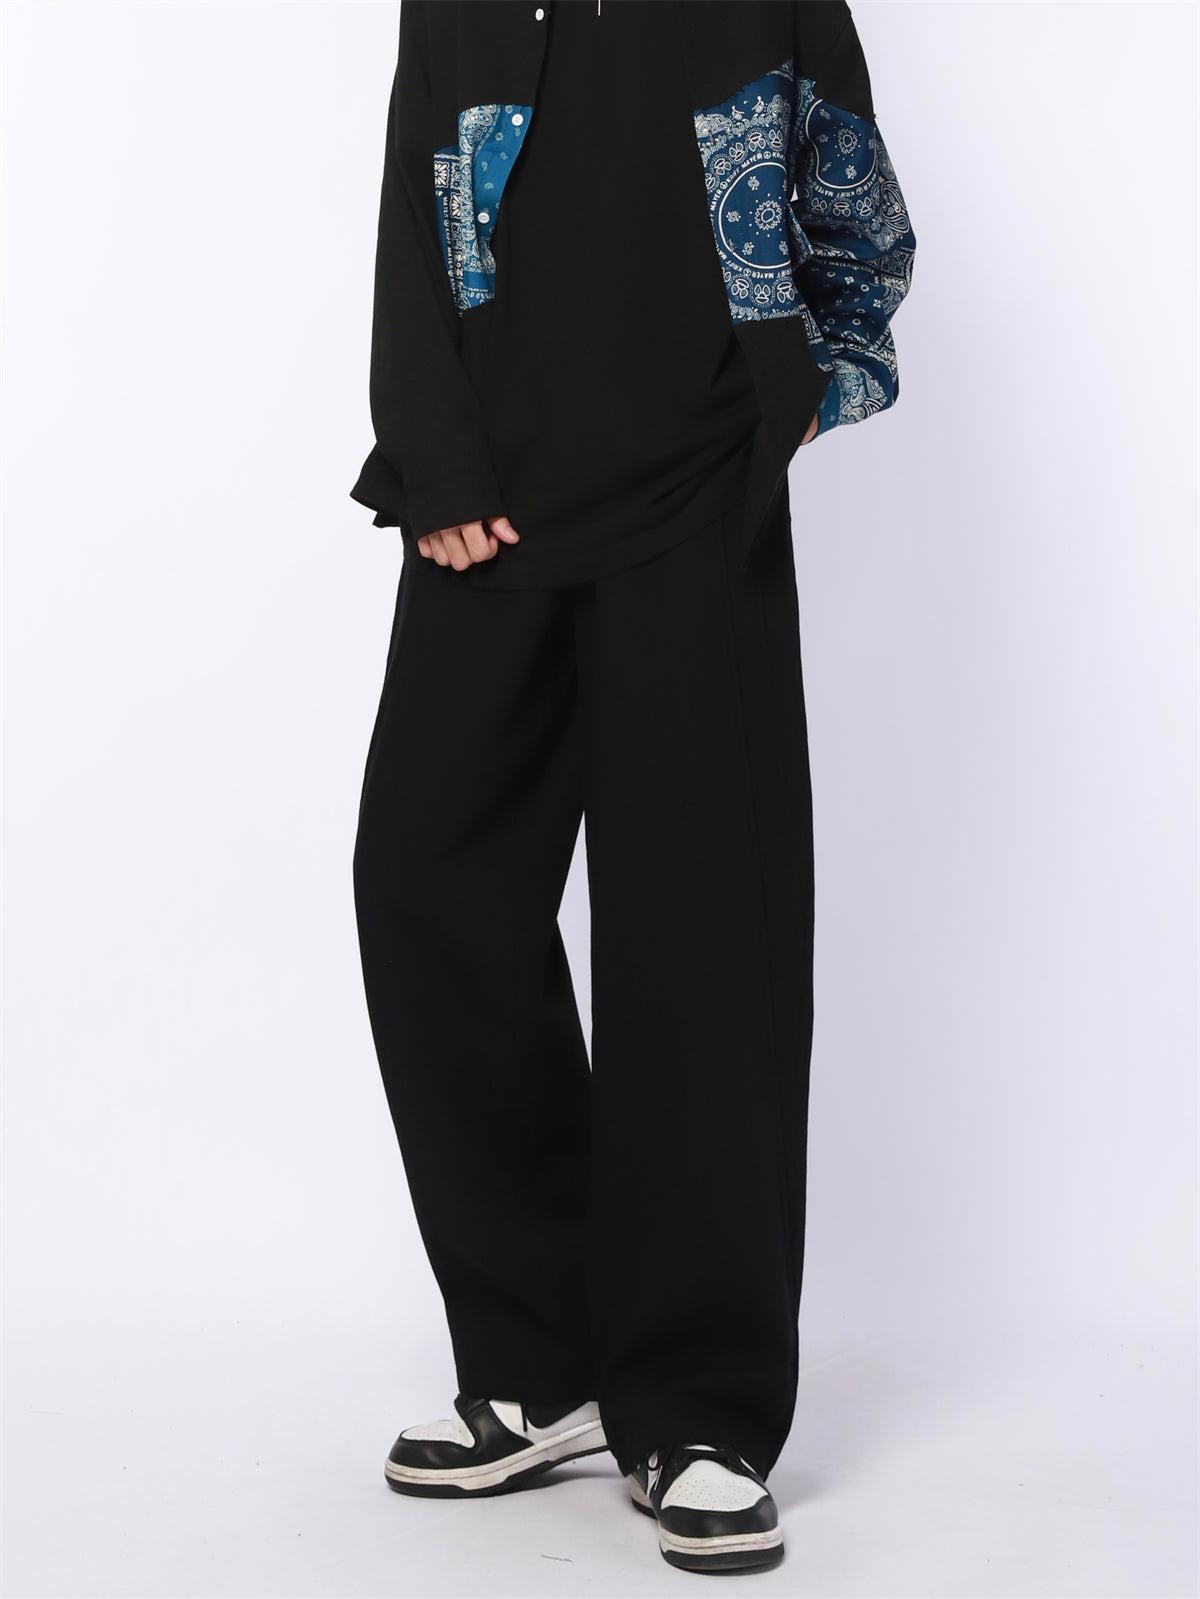 Made Extreme Side Seam Straight Cut Pants Korean Street Fashion Pants By Made Extreme Shop Online at OH Vault